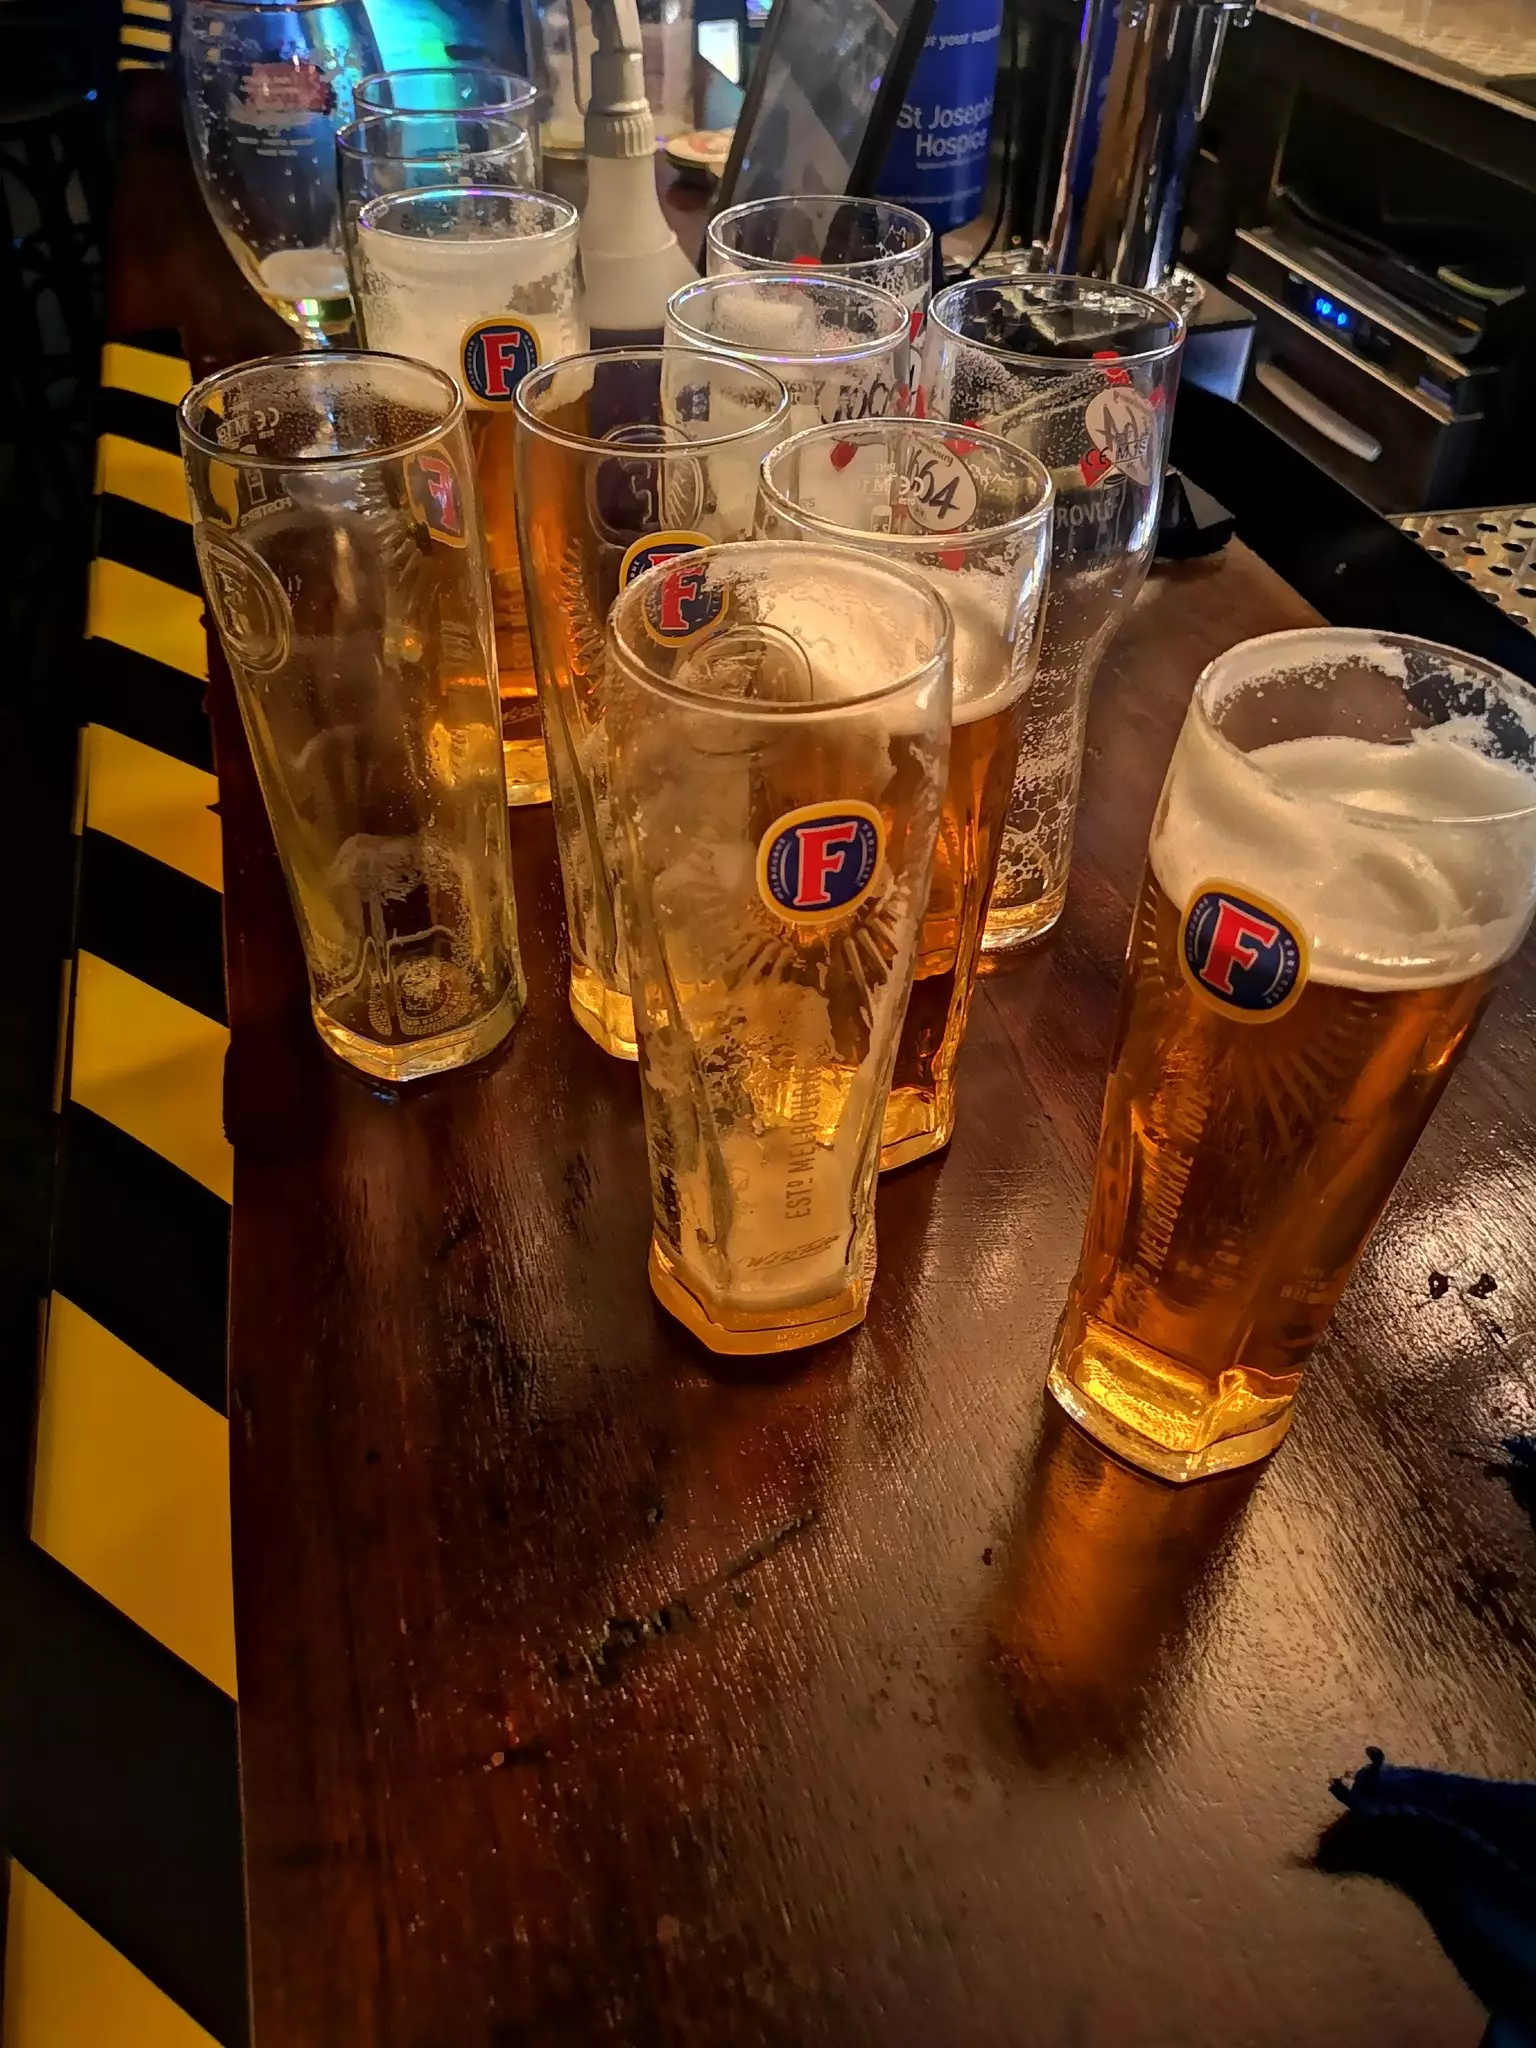 Police in London broke up a get together inside a pub over the weekend.